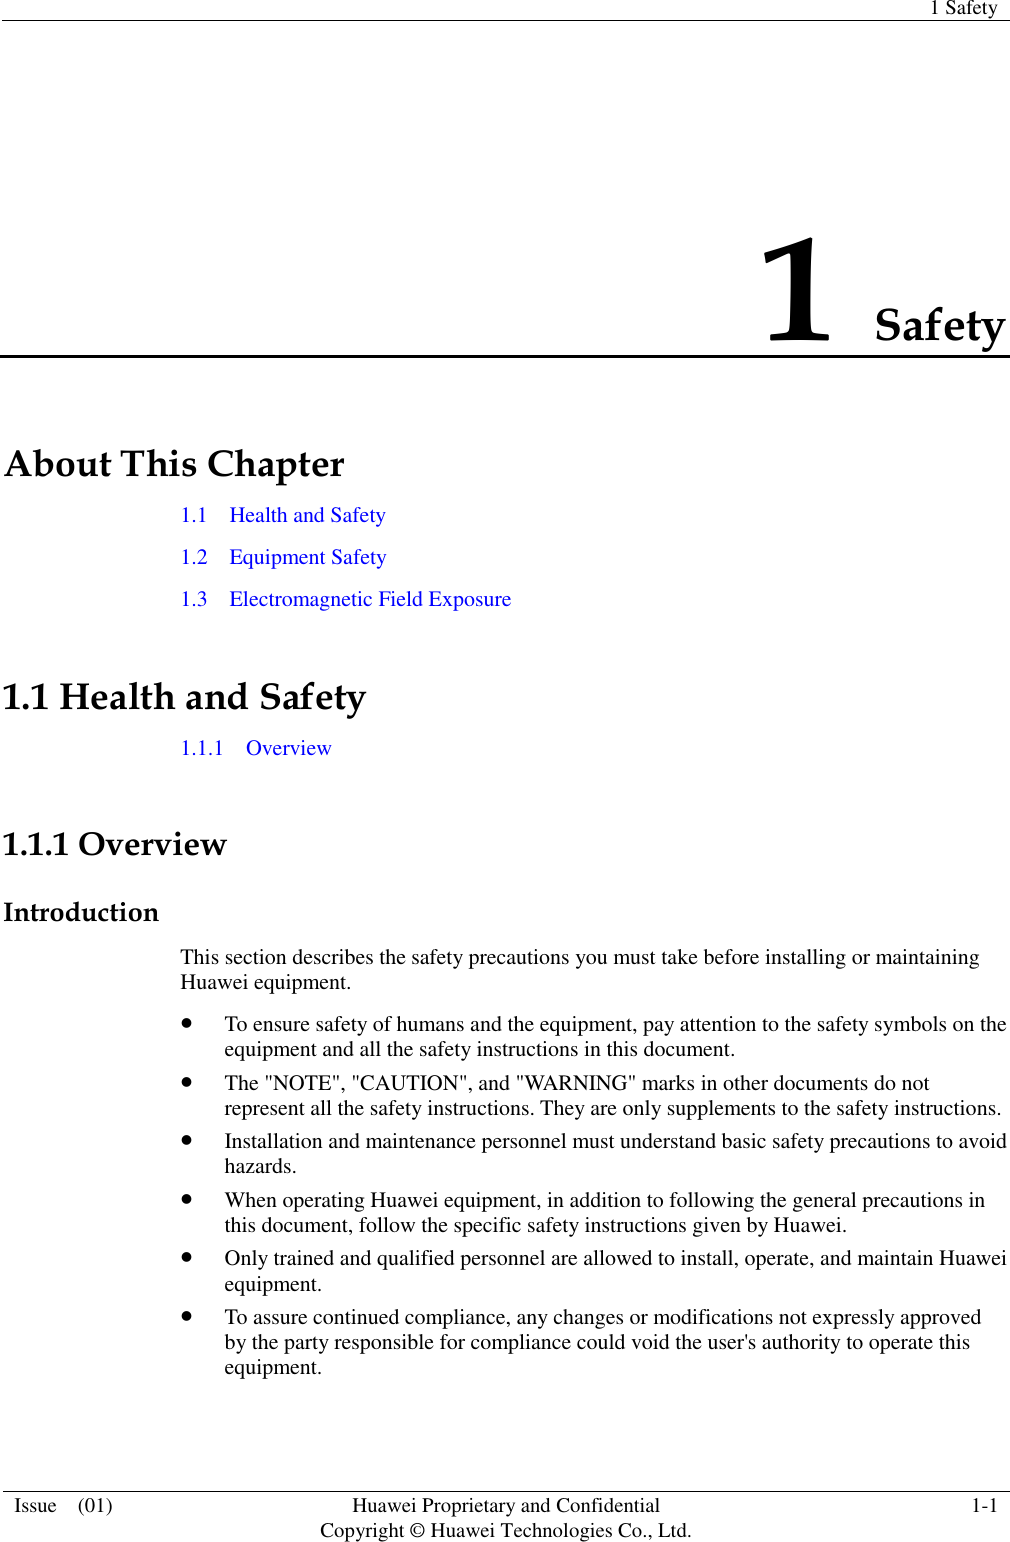   1 Safety  Issue    (01) Huawei Proprietary and Confidential                                     Copyright © Huawei Technologies Co., Ltd. 1-1  1 Safety About This Chapter 1.1    Health and Safety 1.2    Equipment Safety 1.3    Electromagnetic Field Exposure 1.1 Health and Safety 1.1.1    Overview  1.1.1 Overview Introduction This section describes the safety precautions you must take before installing or maintaining Huawei equipment.  To ensure safety of humans and the equipment, pay attention to the safety symbols on the equipment and all the safety instructions in this document.  The &quot;NOTE&quot;, &quot;CAUTION&quot;, and &quot;WARNING&quot; marks in other documents do not represent all the safety instructions. They are only supplements to the safety instructions.  Installation and maintenance personnel must understand basic safety precautions to avoid hazards.  When operating Huawei equipment, in addition to following the general precautions in this document, follow the specific safety instructions given by Huawei.  Only trained and qualified personnel are allowed to install, operate, and maintain Huawei equipment.  To assure continued compliance, any changes or modifications not expressly approved by the party responsible for compliance could void the user&apos;s authority to operate this equipment.  